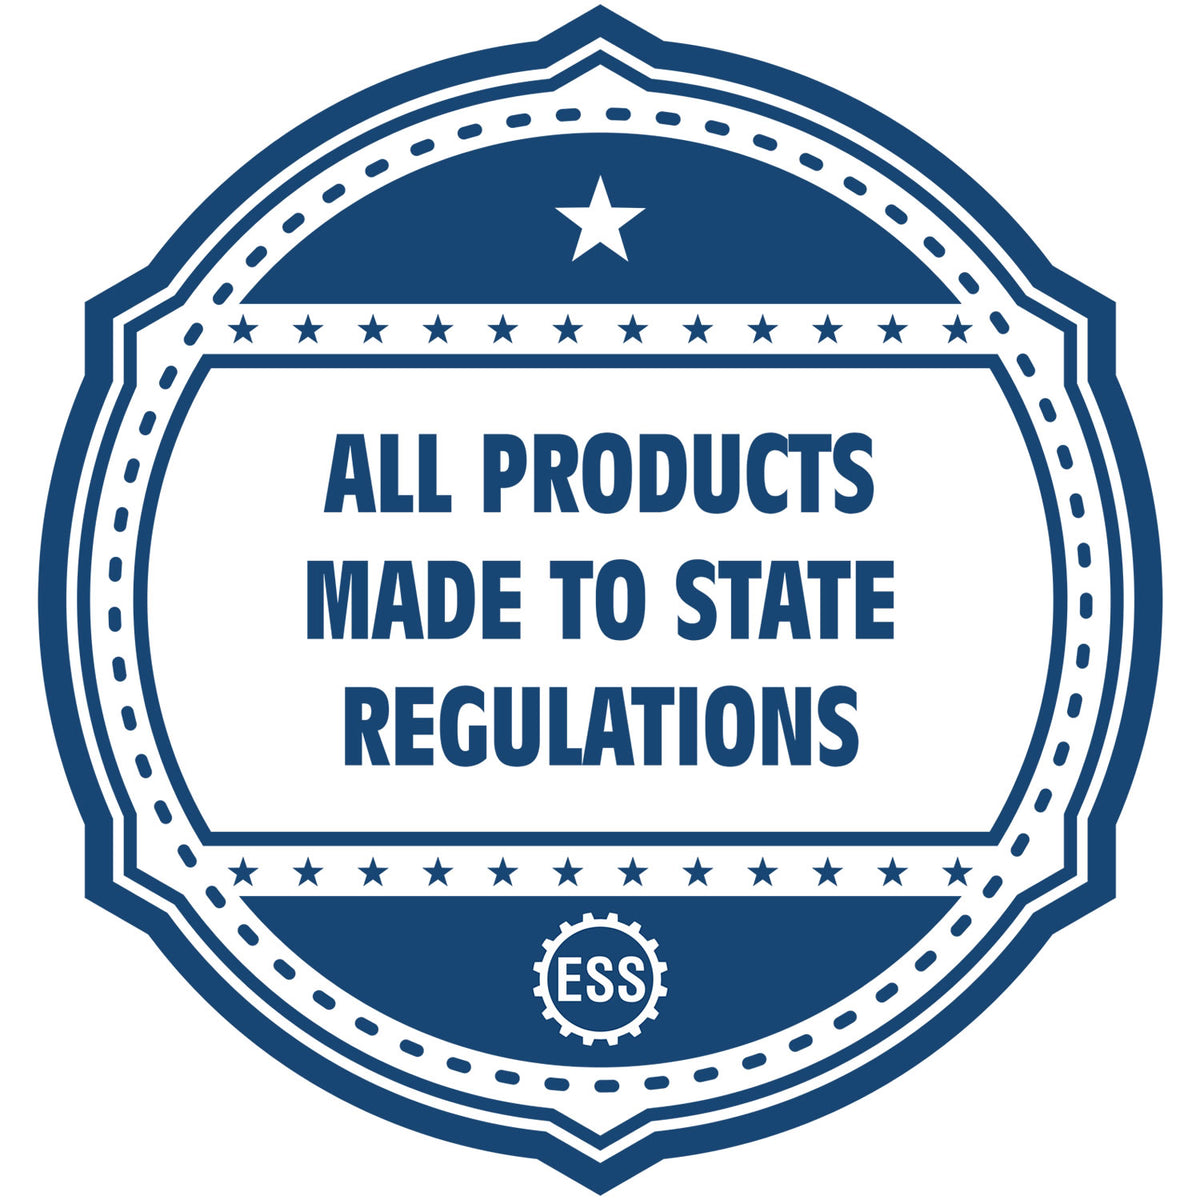 A blue icon or badge for the Hybrid Kansas Architect Seal showing that this product is made in compliance with state regulations.